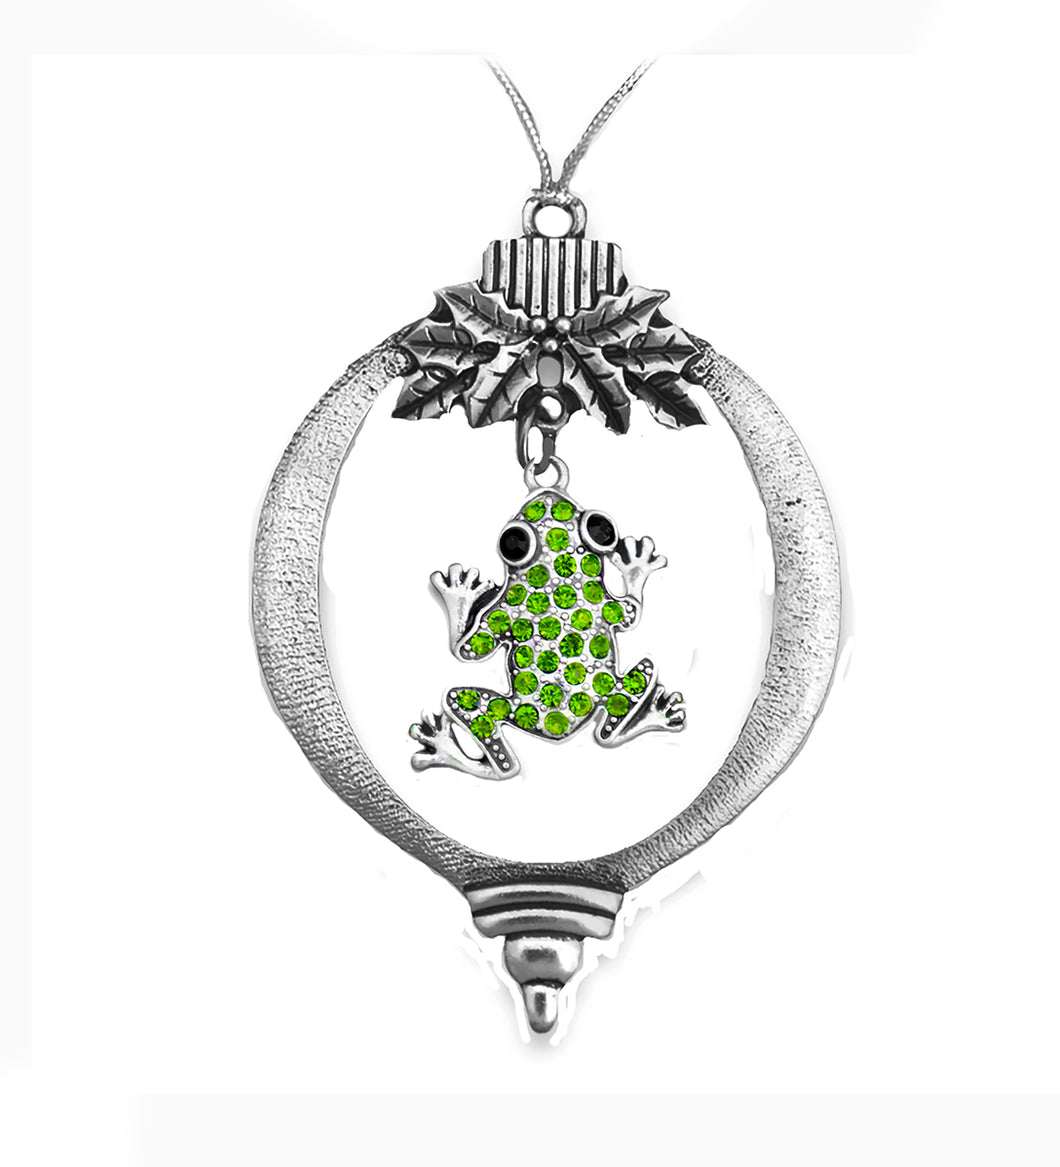 Christmas Ornament, Green Tree Frog, Changes Color In Different Light, With Tree Attachment, Great Gift! Super Fast Shipping.©2015 ©2021